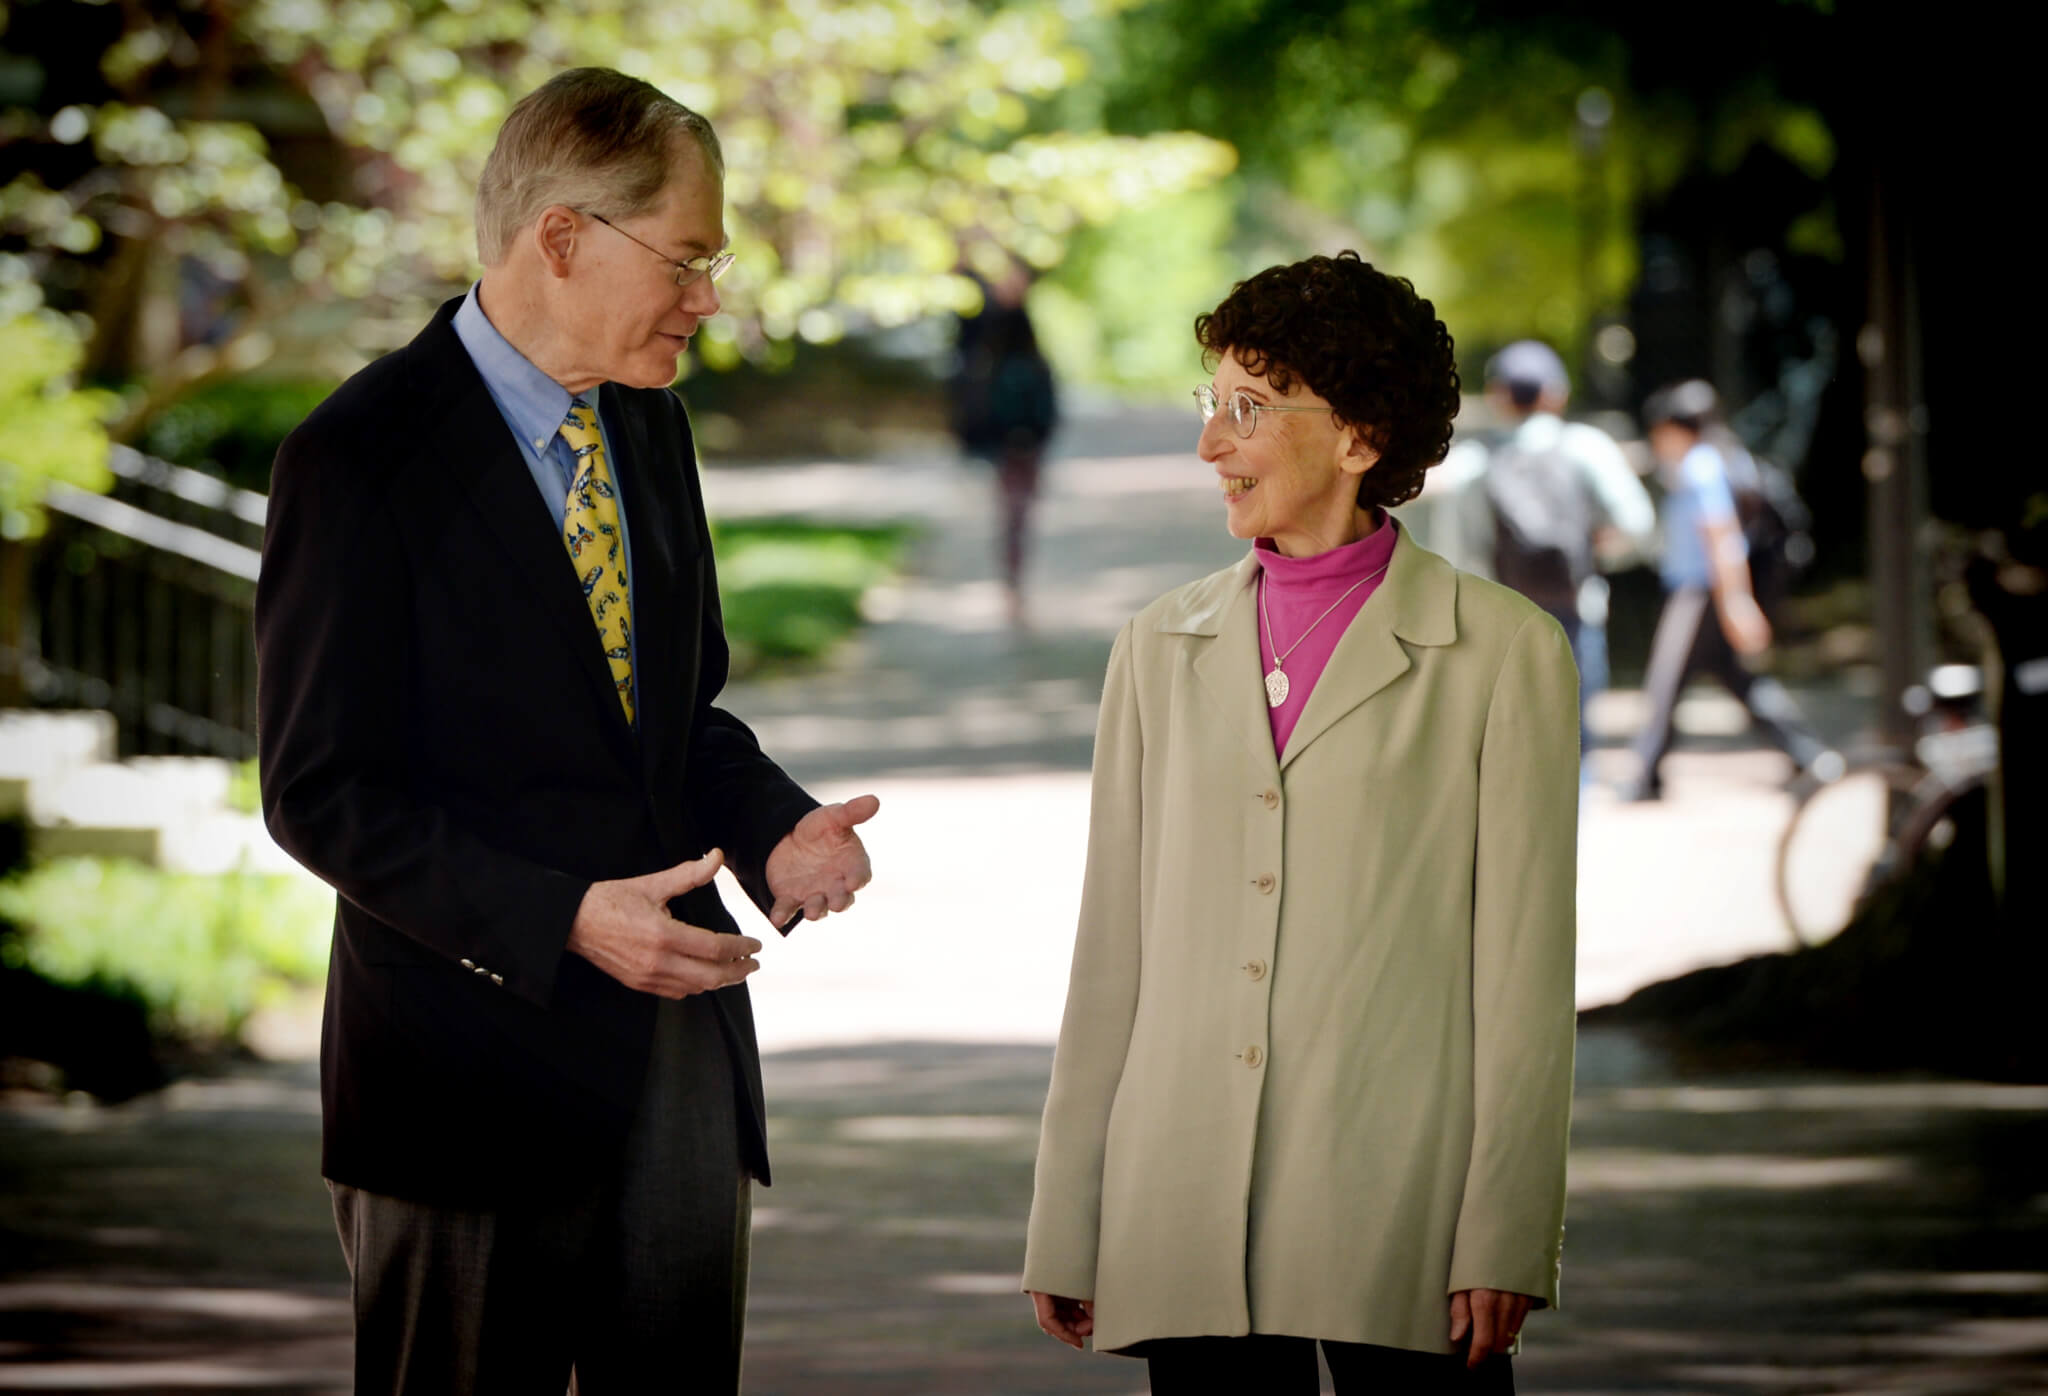 A portrait of John and Joy Kasson on campus